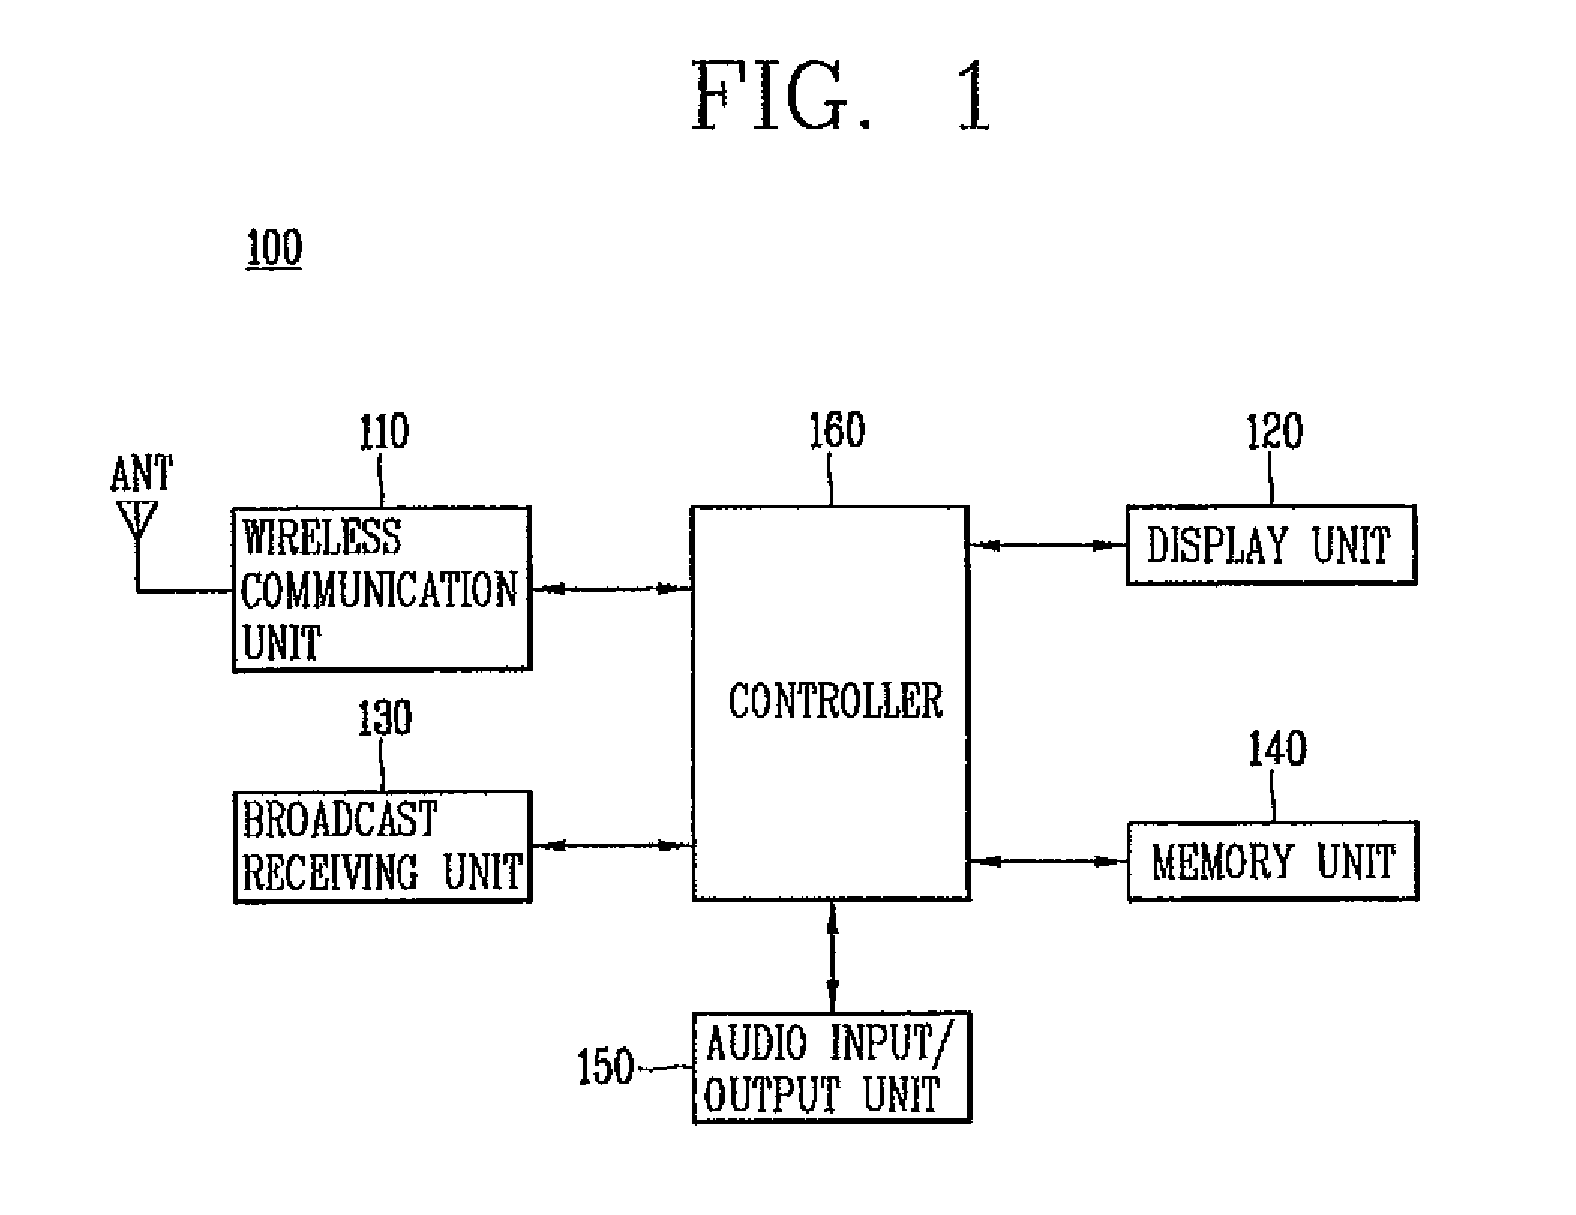 Display device and method of mobile terminal